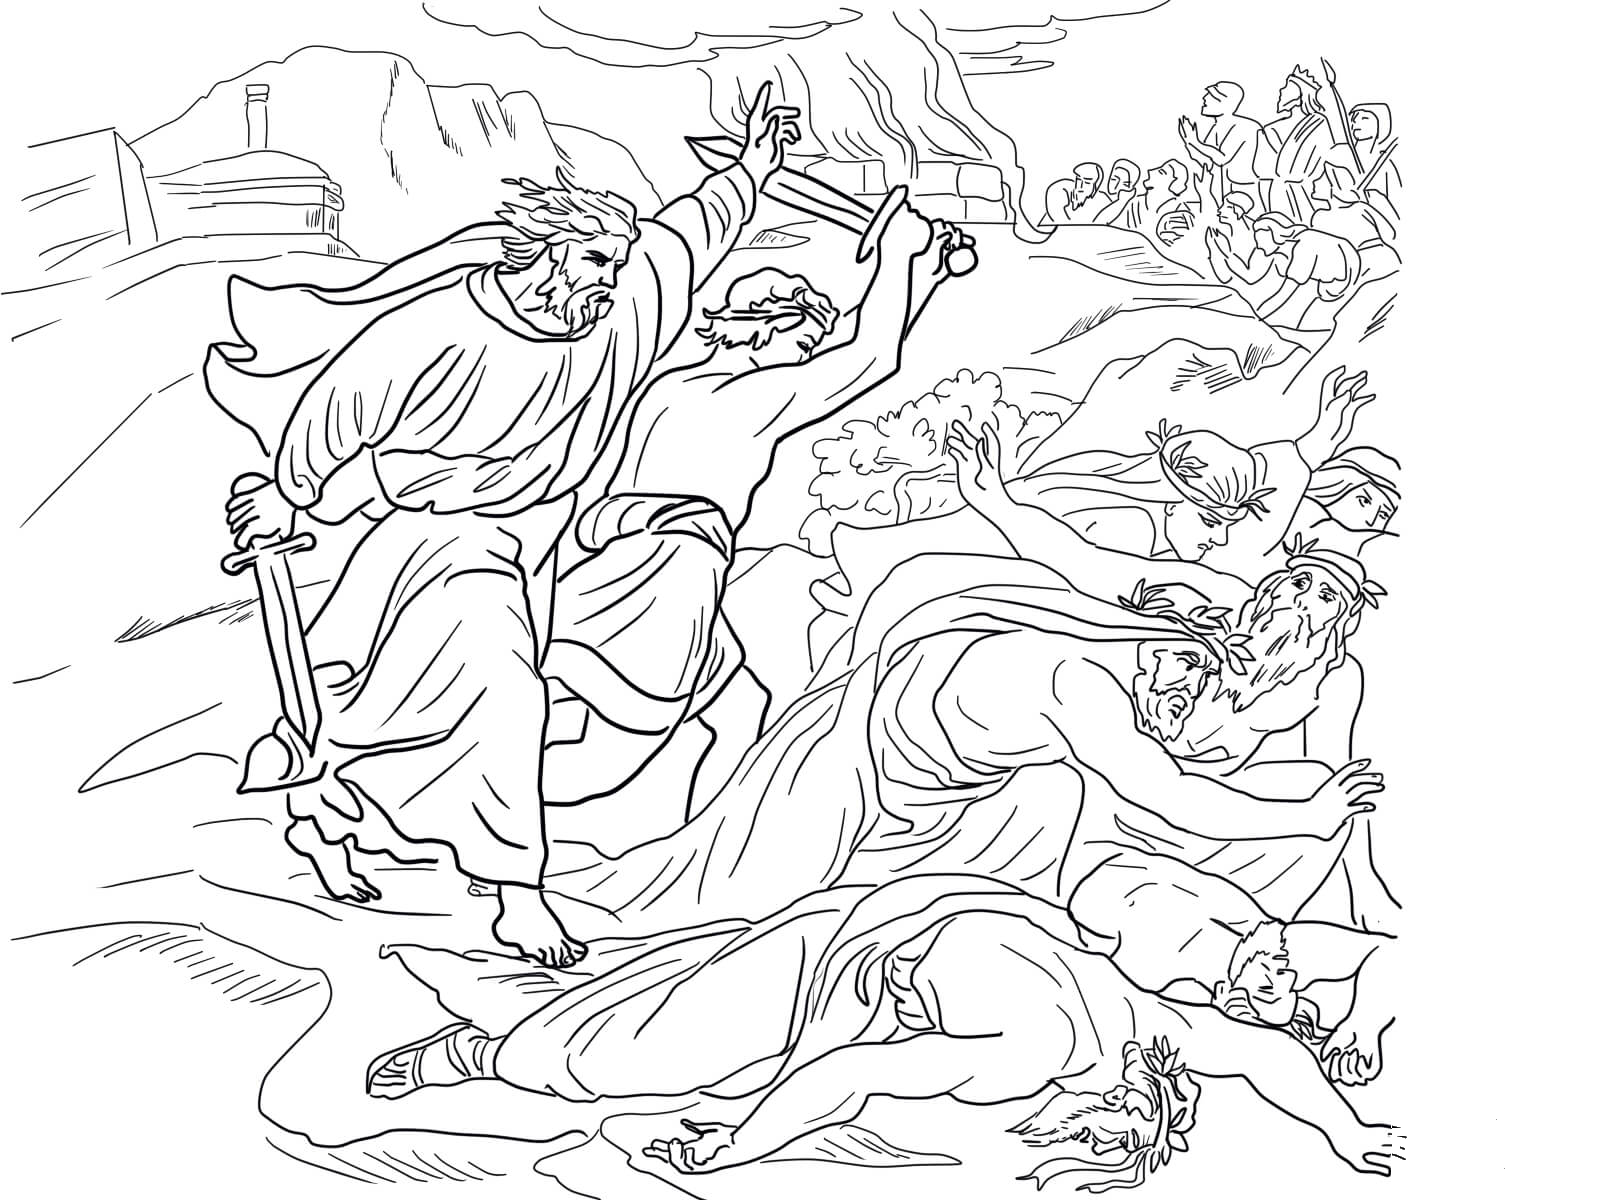 Elijah Defeats the Prophets of Baal coloring page - ColouringPages